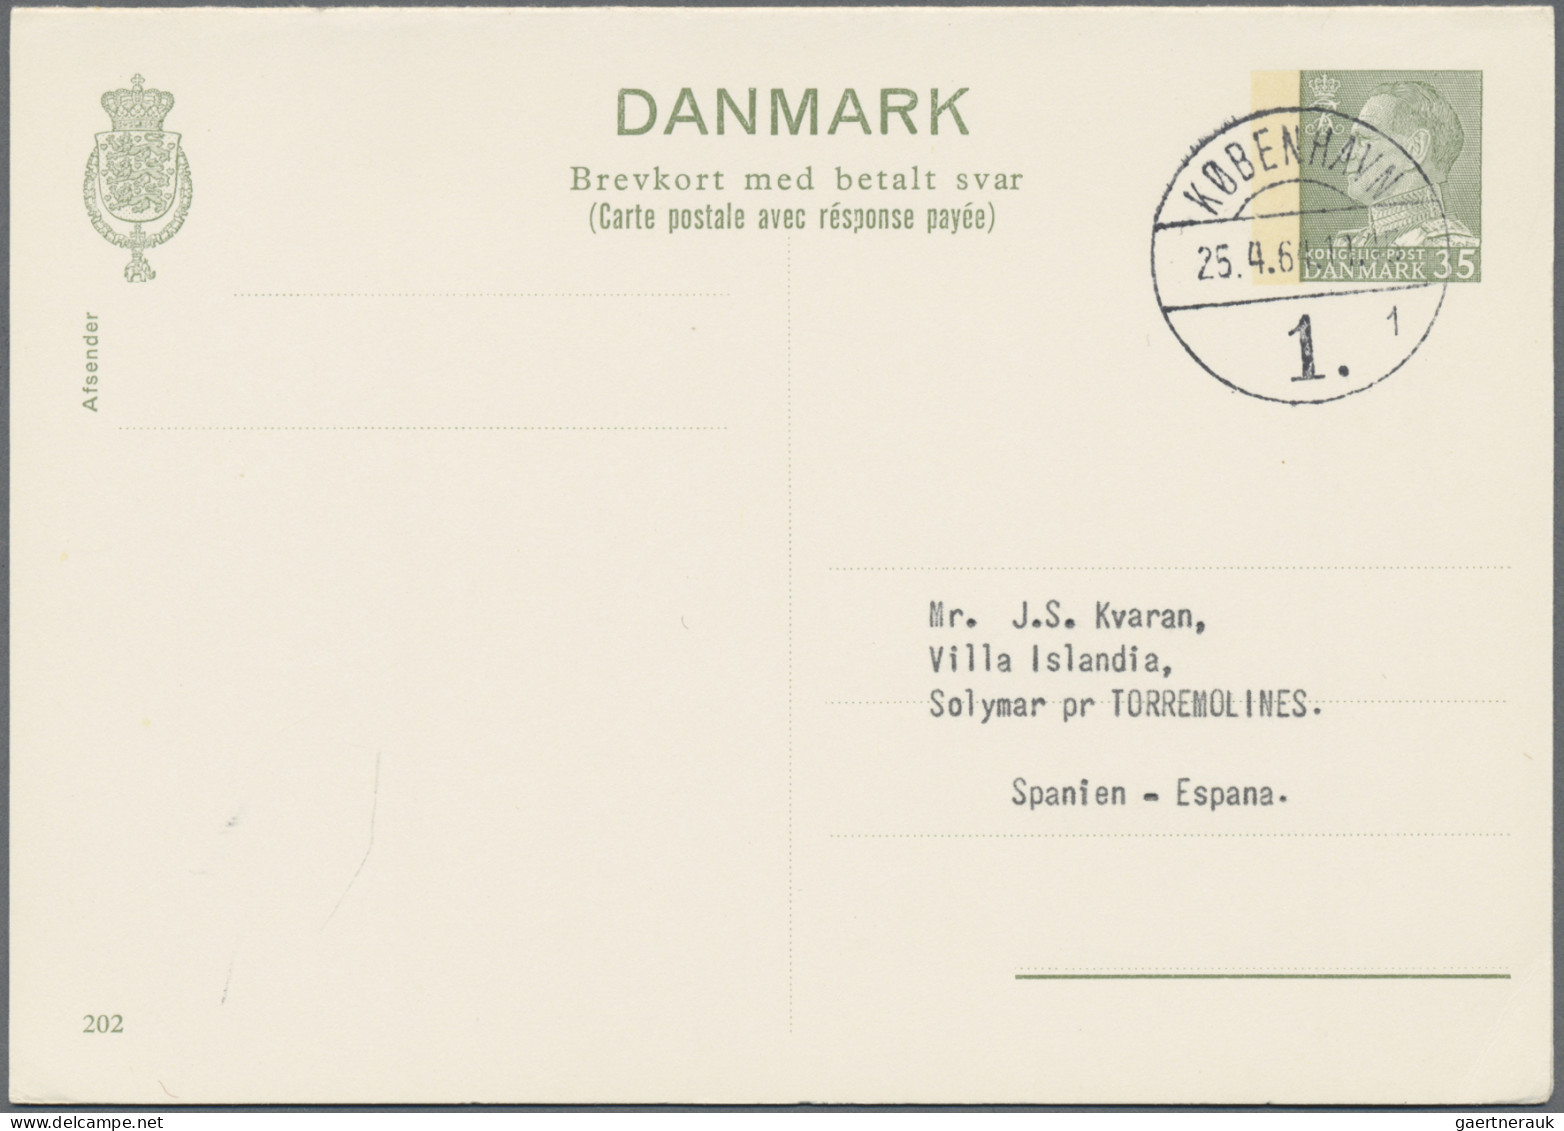 Denmark - postal stationery: 1883/1984, lot of 40 used stationeries incl. unseve